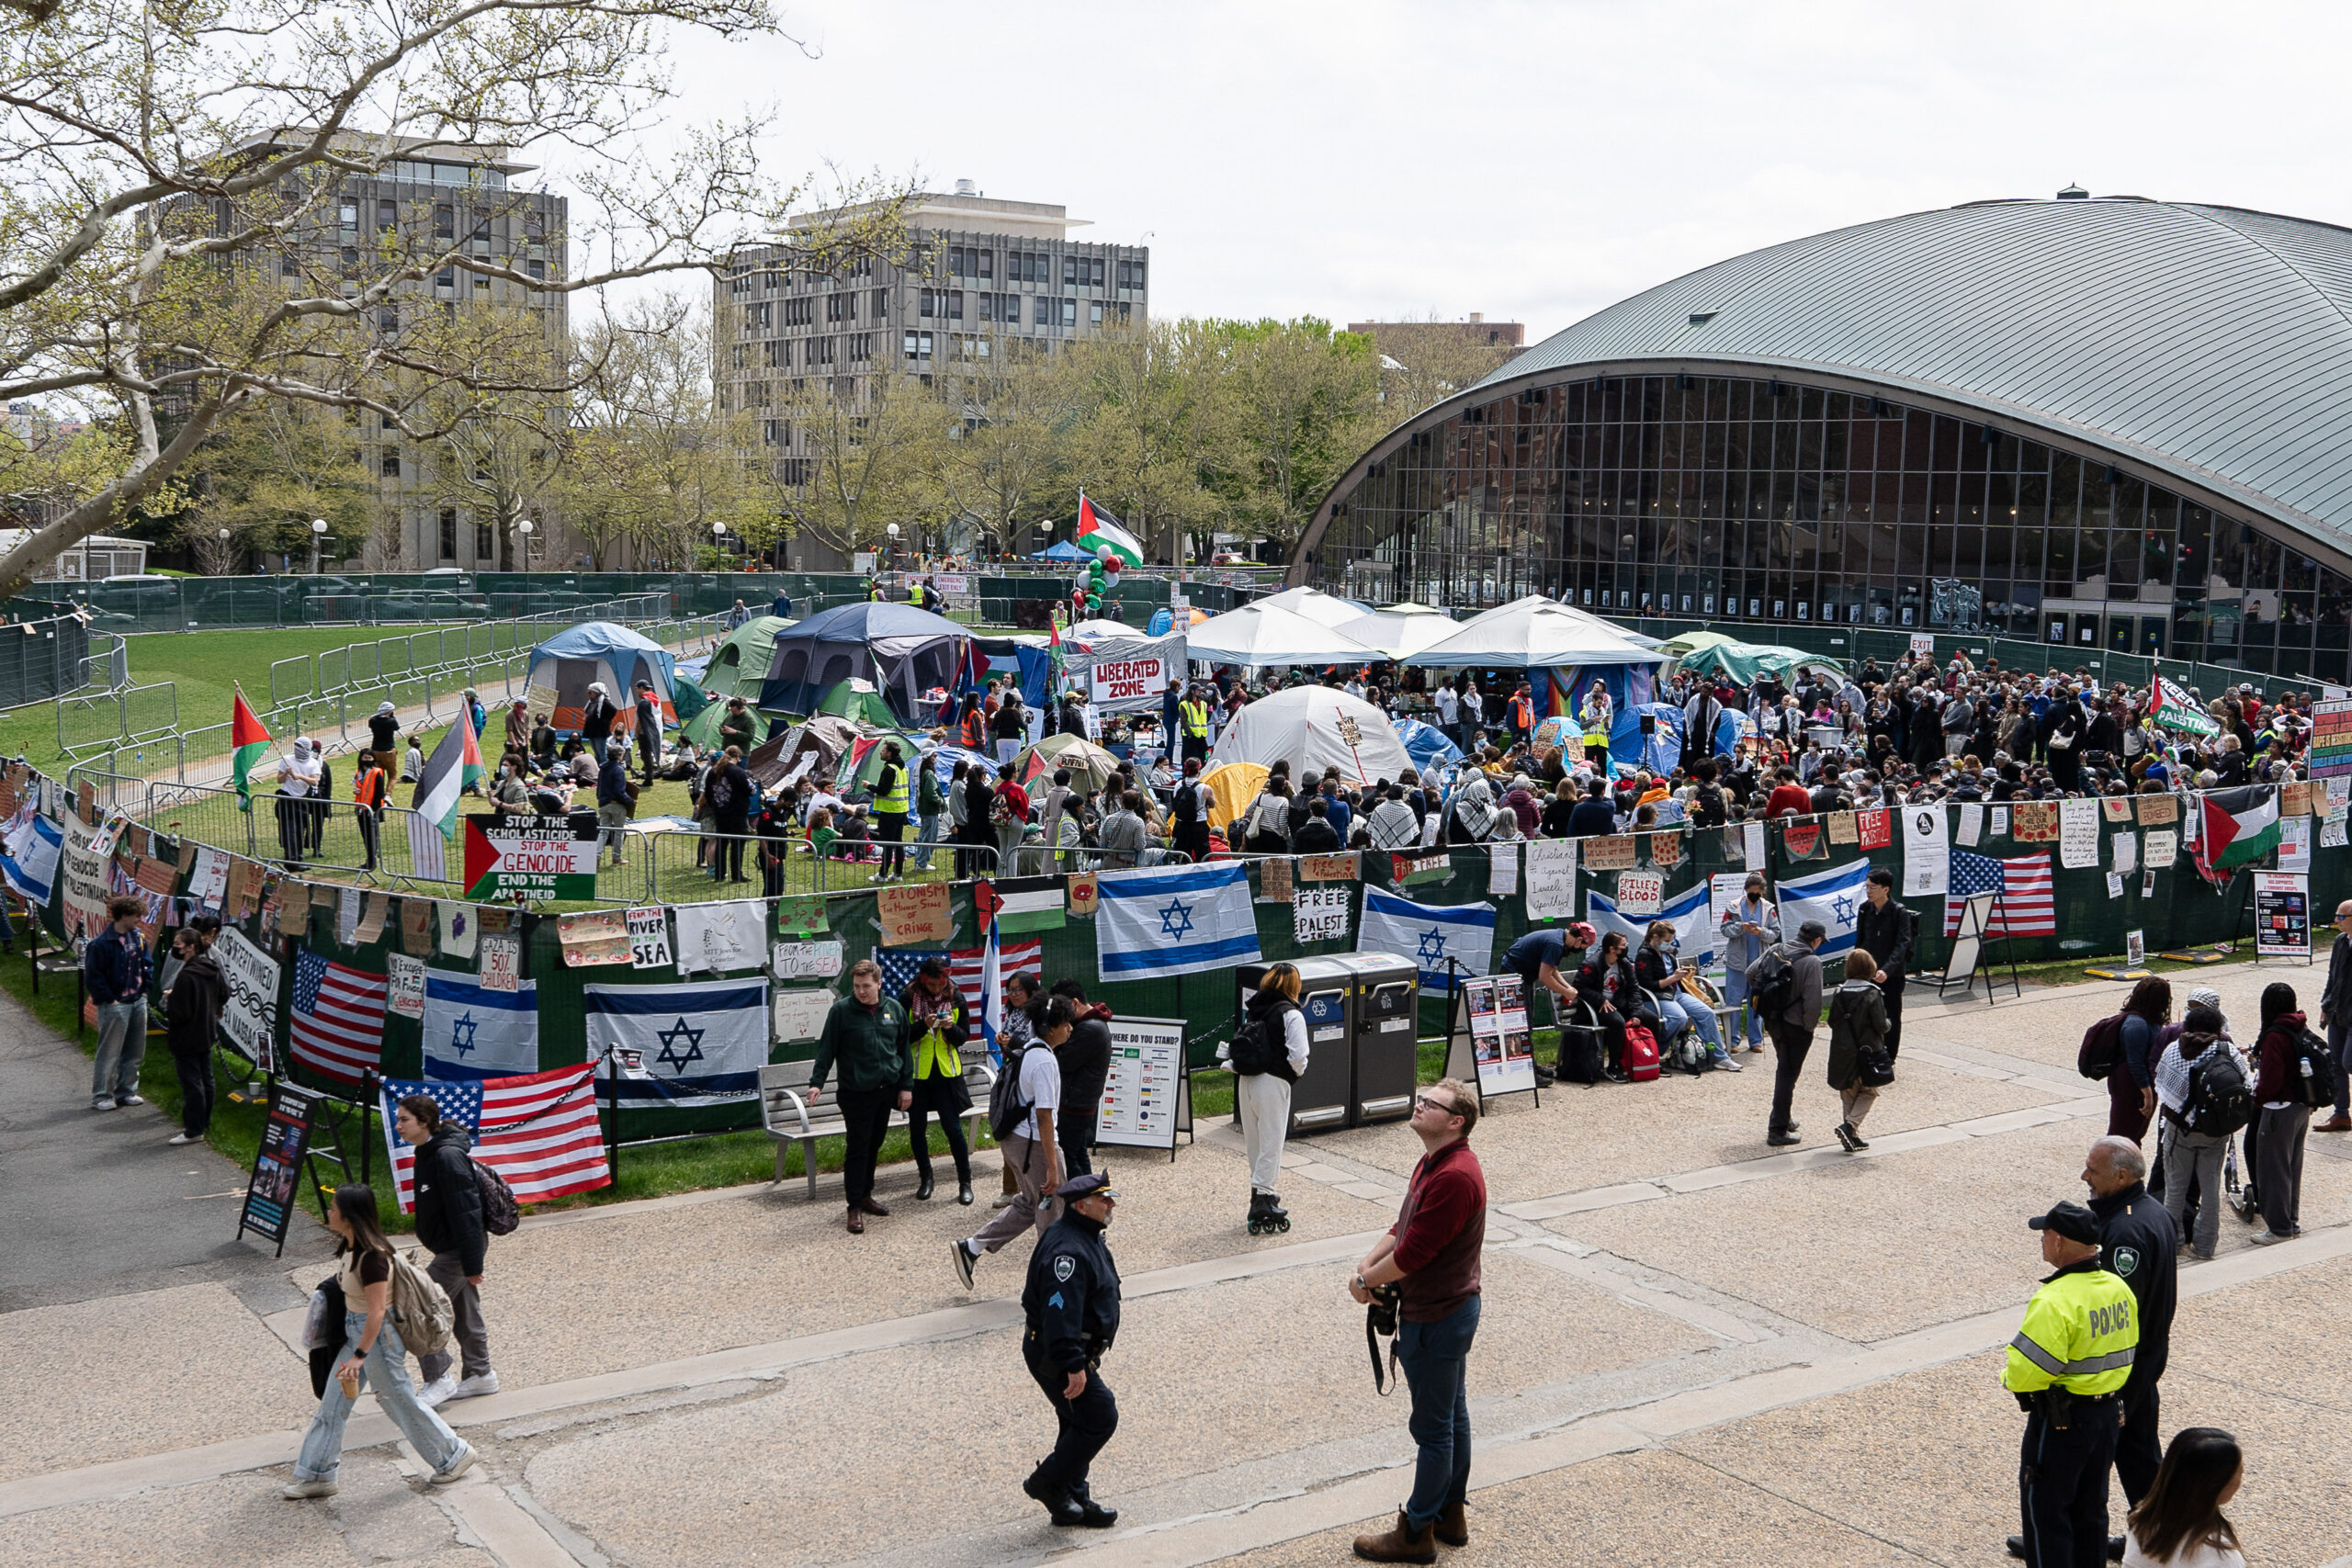 MIT warns of potential suspension for anti-Israel protesters who do not vacate encampment